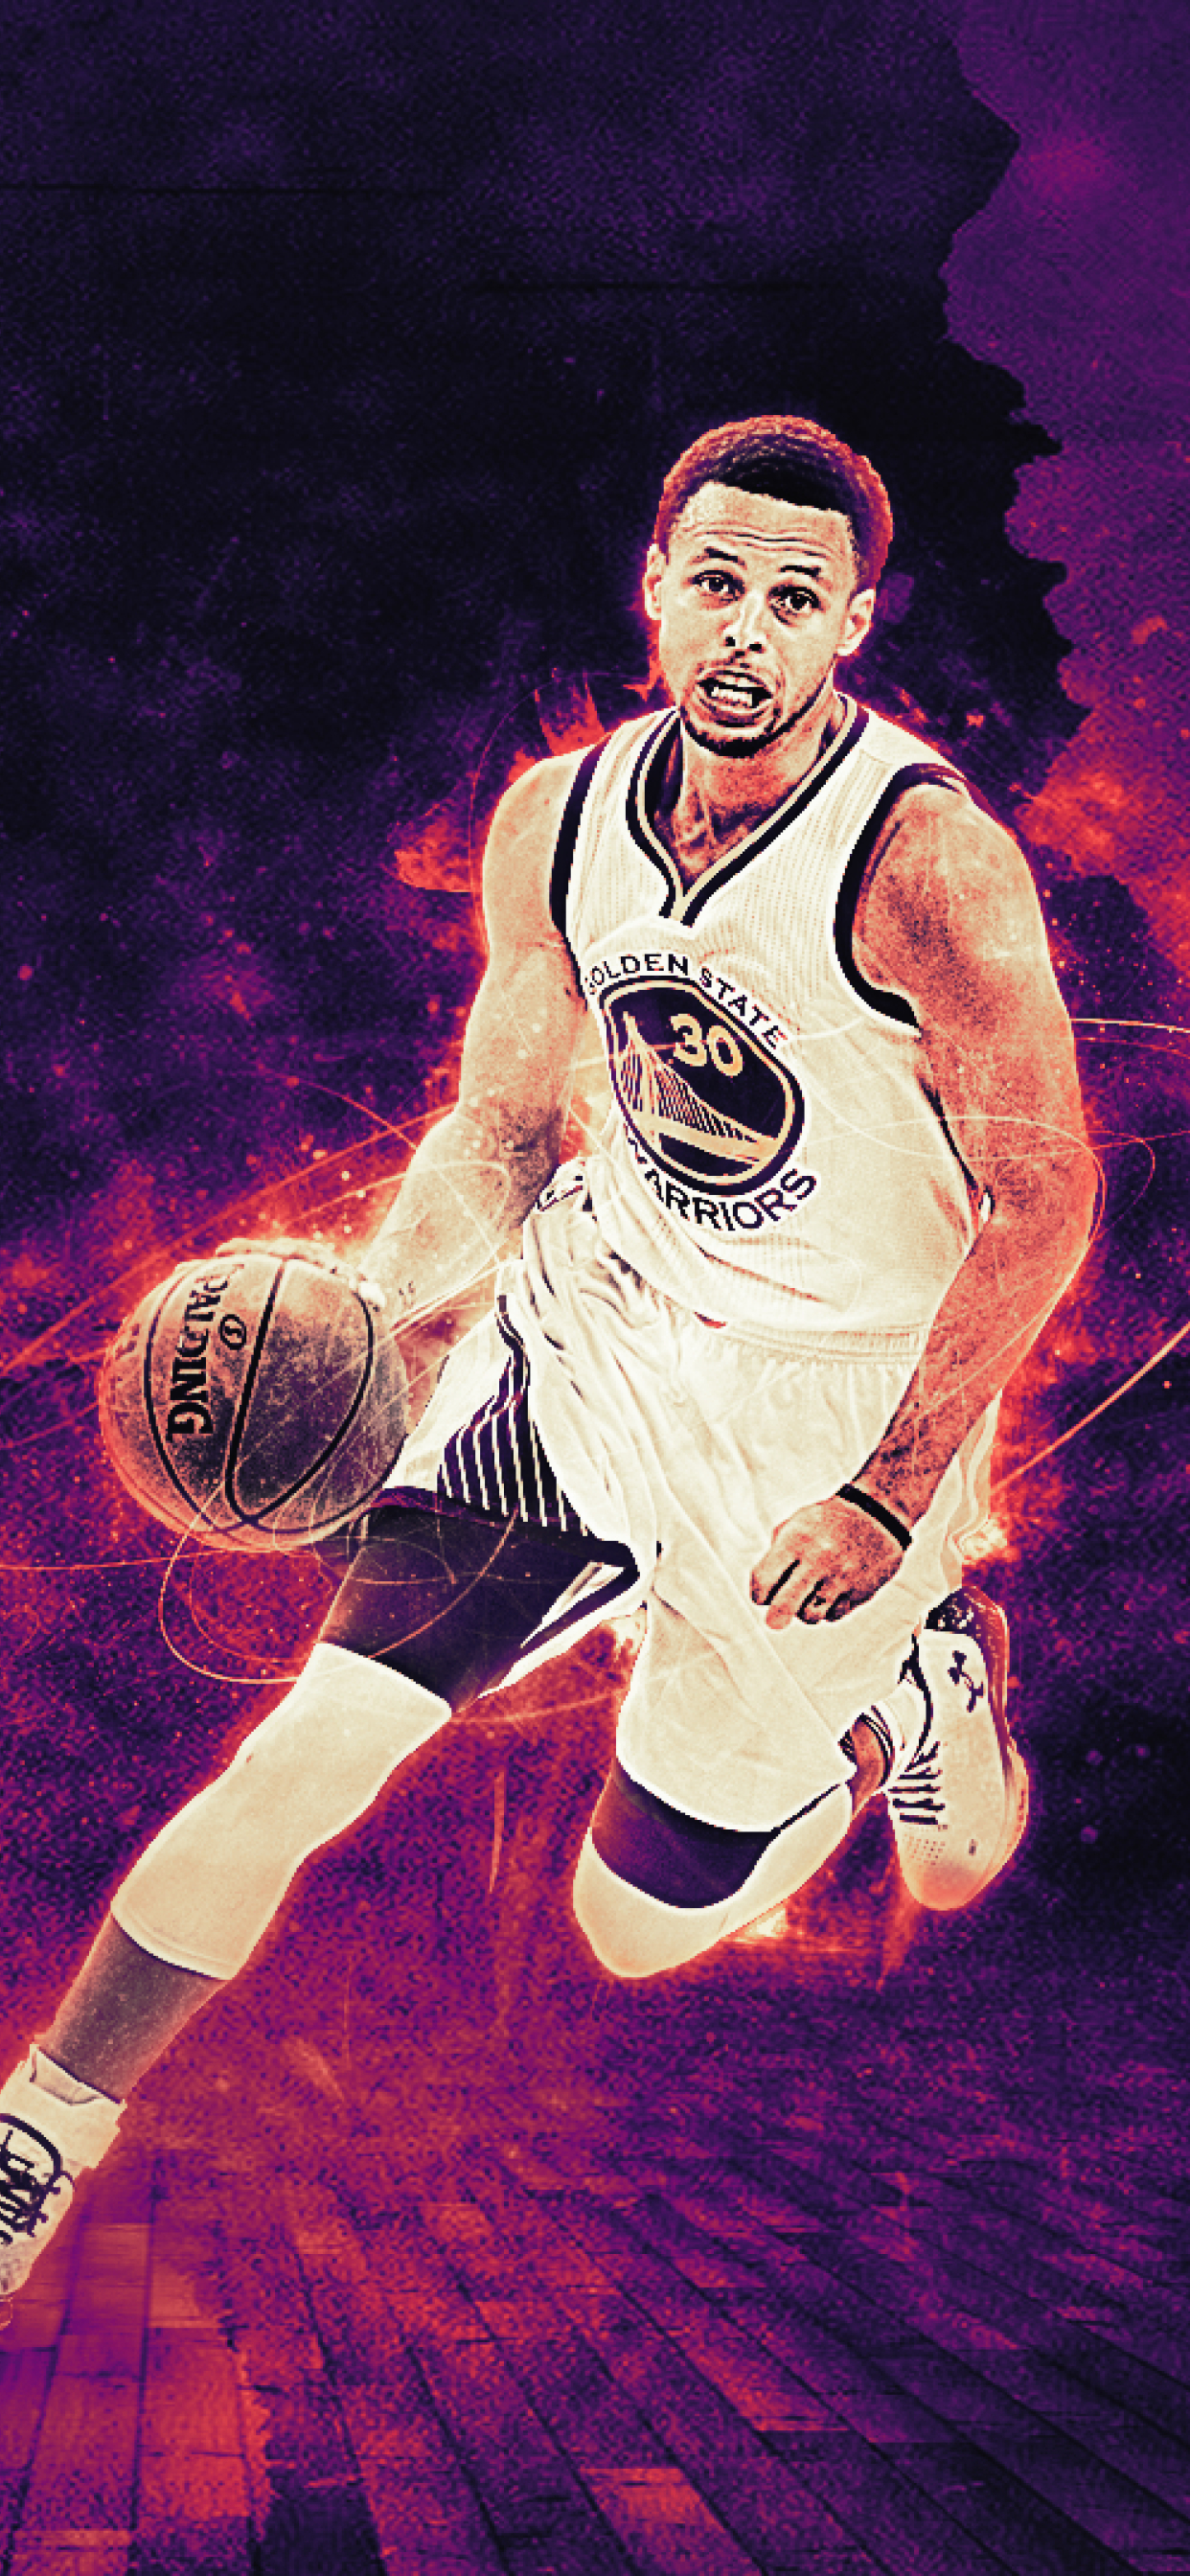 Nate Hudson on Instagram throwback stephencurry30 art piece       ar in 2023  Stephen curry wallpaper Nba wallpapers stephen curry  Stephen curry basketball